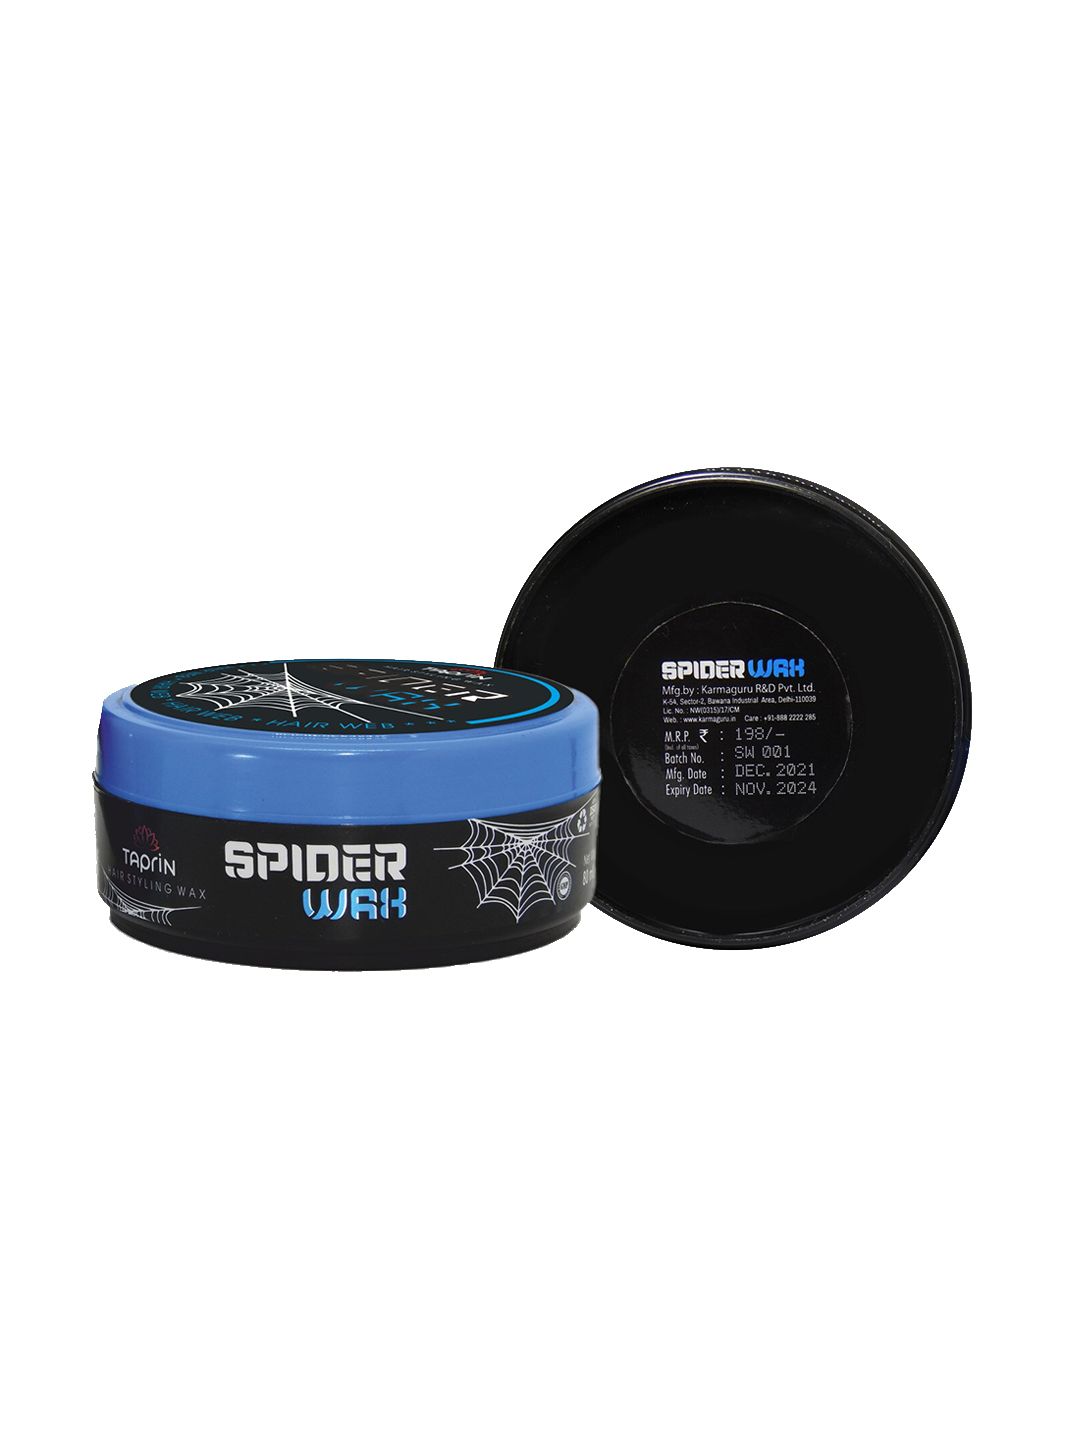 Taprin Spider Hair Wax for All Hair Types - 80 ml Price in India